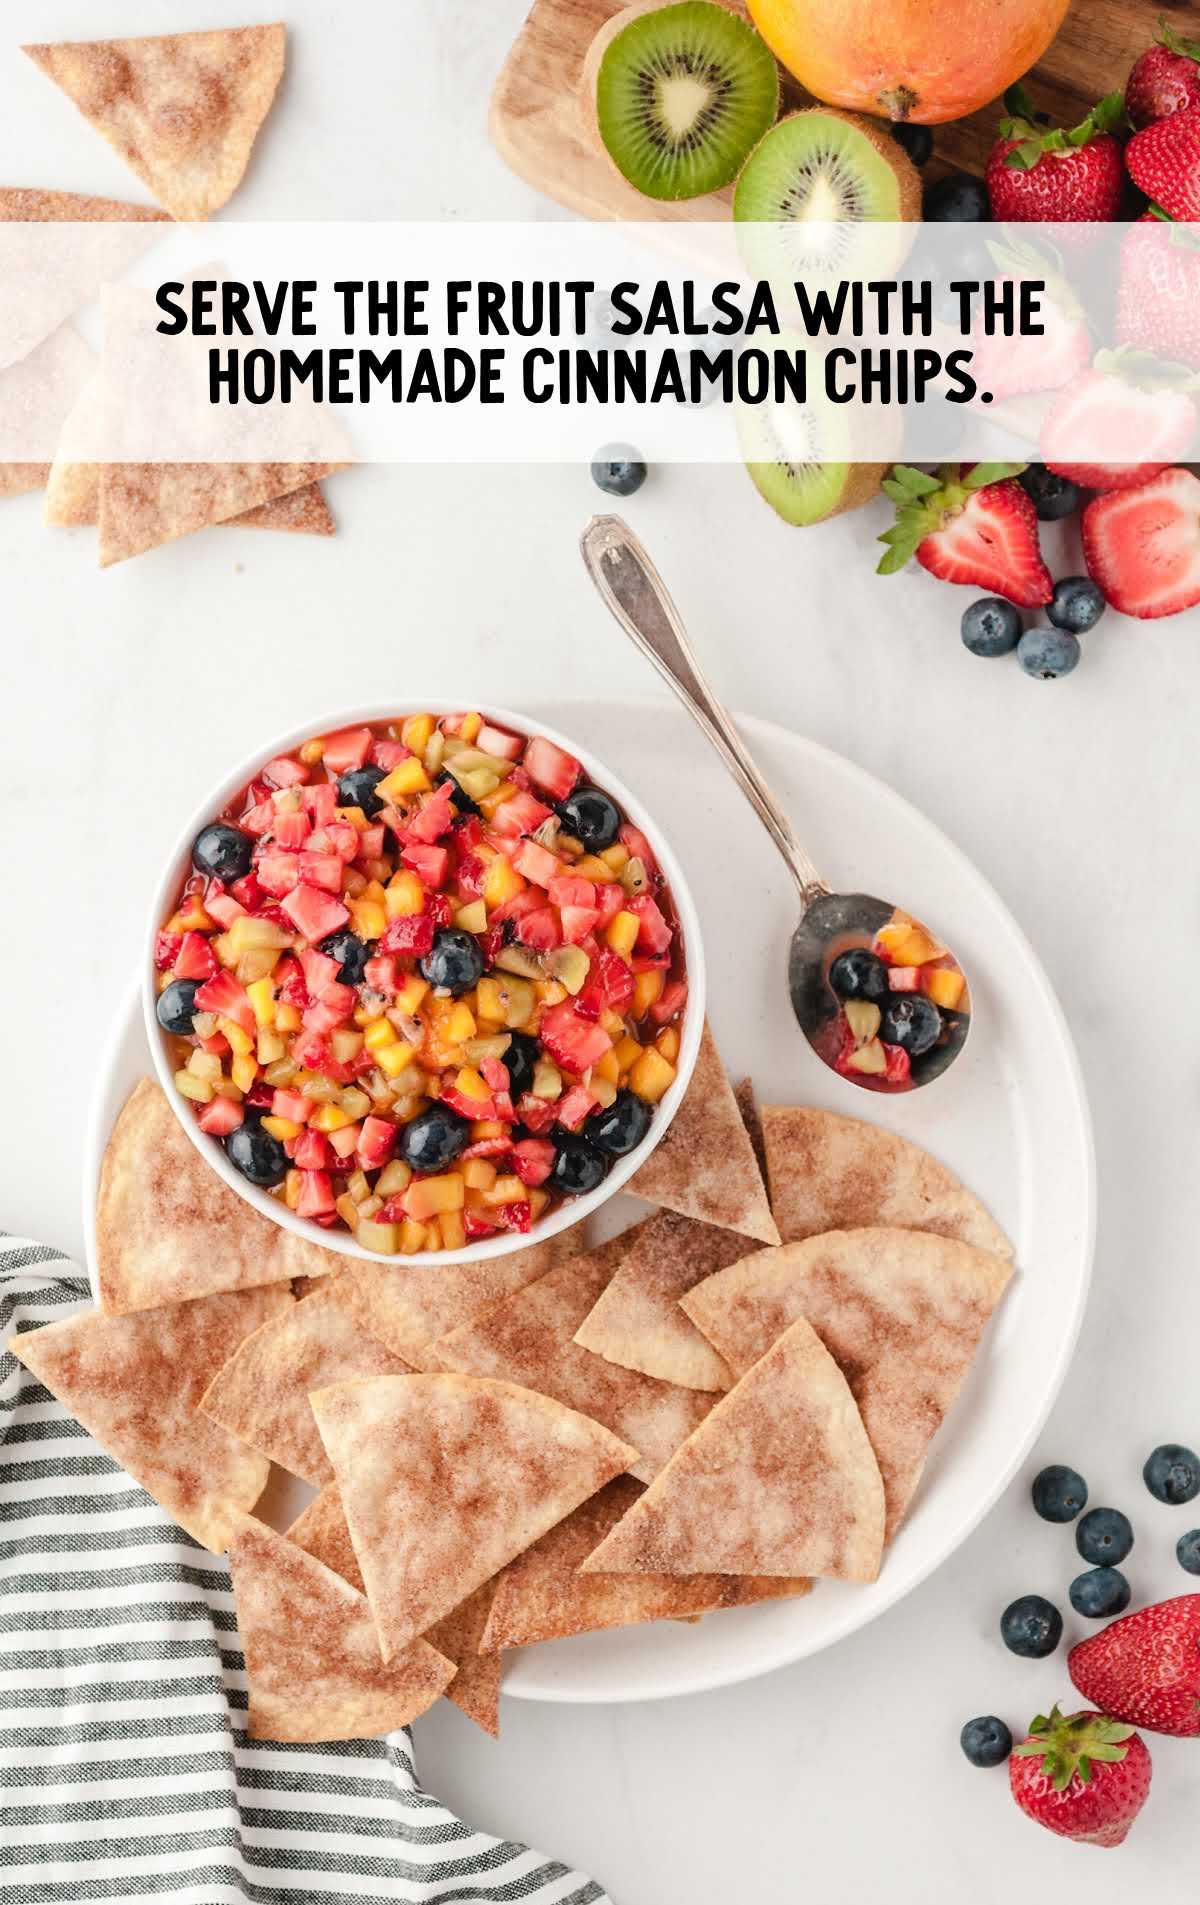 Fruit Salsa with Cinnamon Chips in a plate